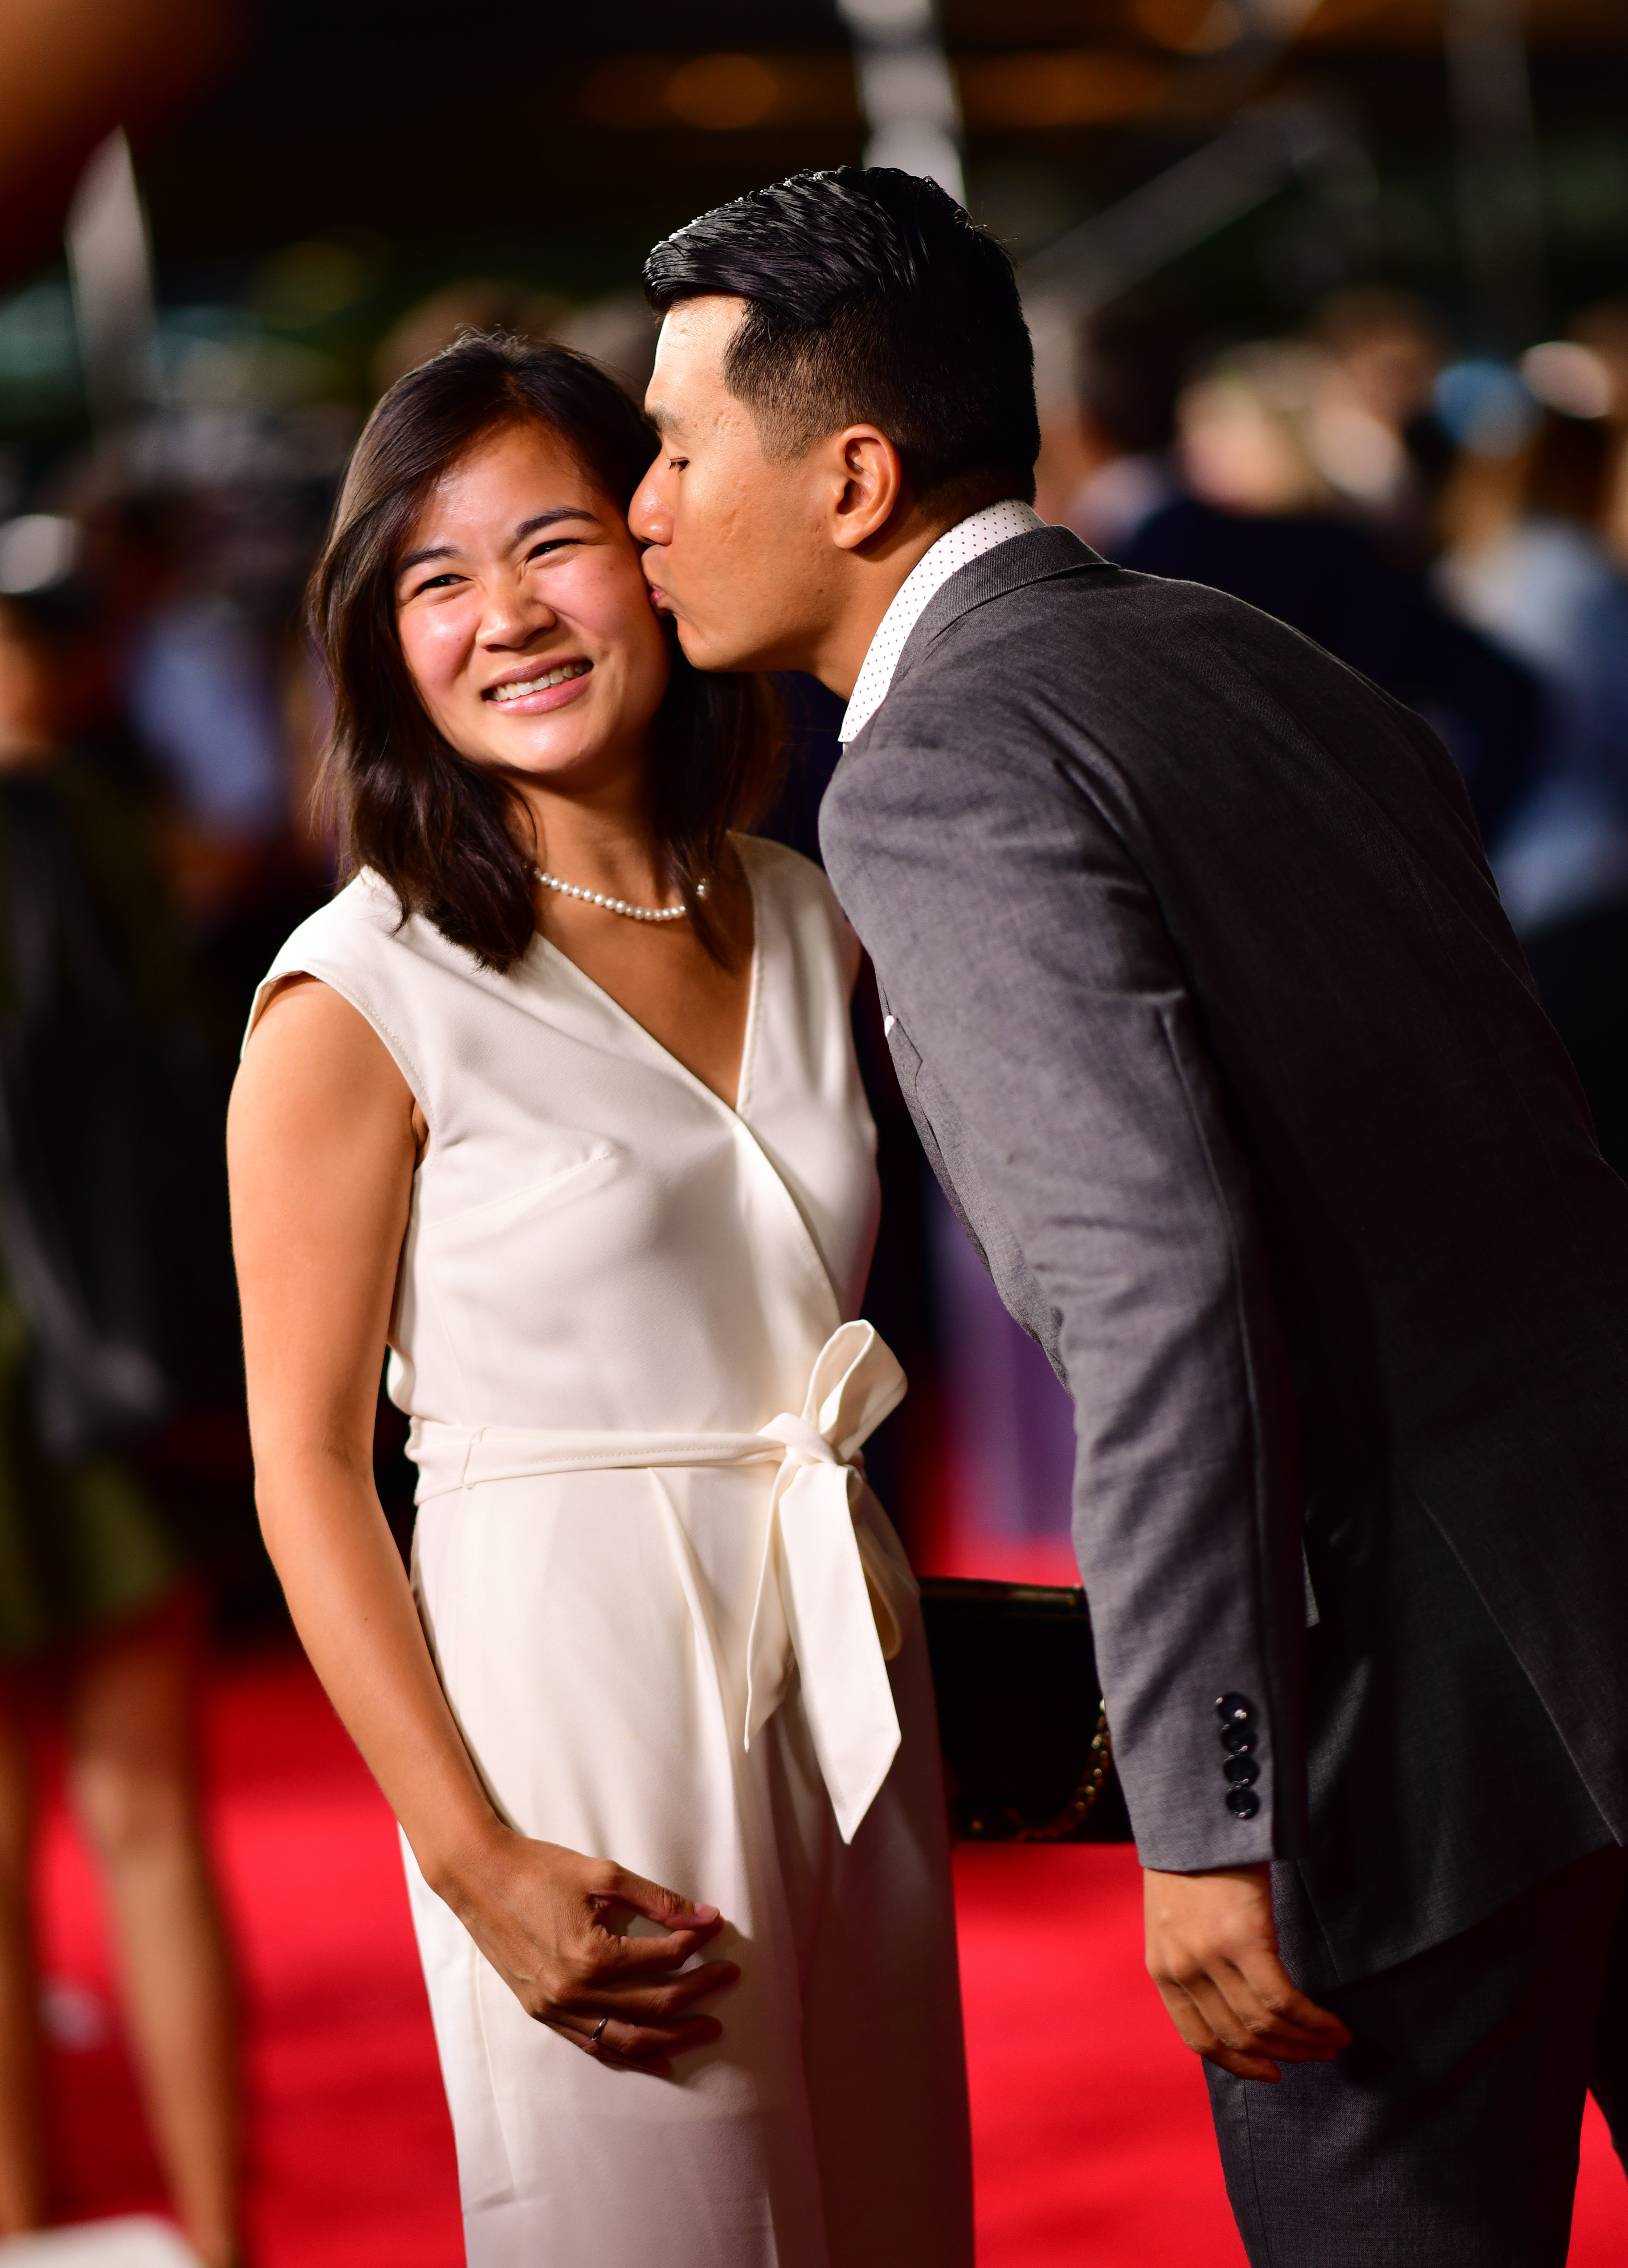 Hannah Pham and Ronny Chieng kissing at the "Mission Impossible: Fallout" Premiere at the Smithsonian National Air & Space Museum on July 22, 2018, in Washington, D.C. | Source: Getty Images